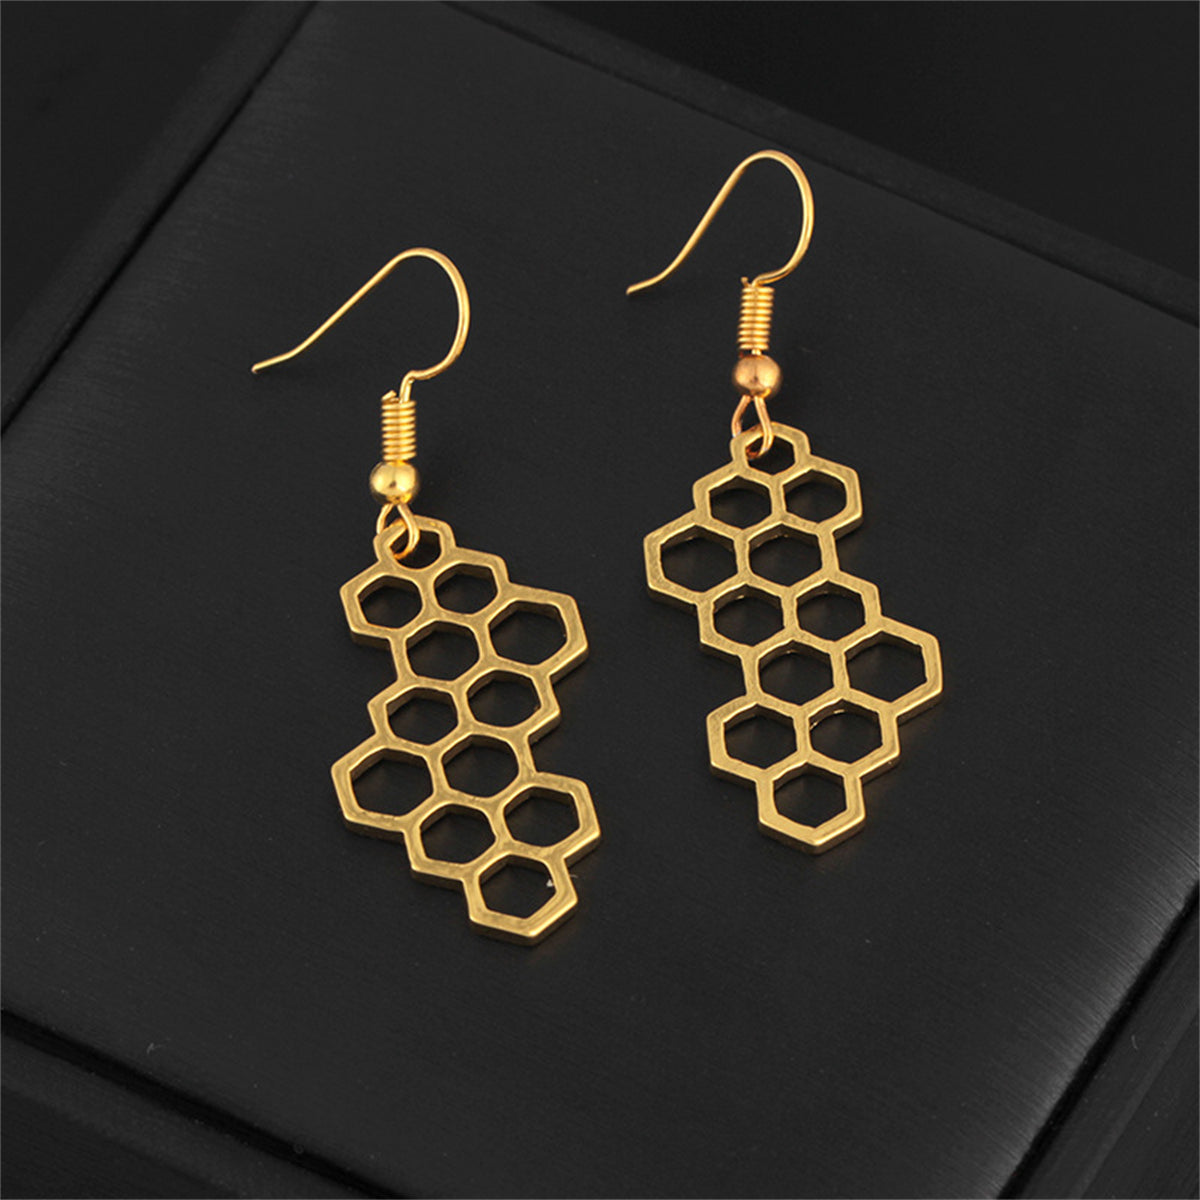 18K Gold-Plated Honeycomb Drop Earrings